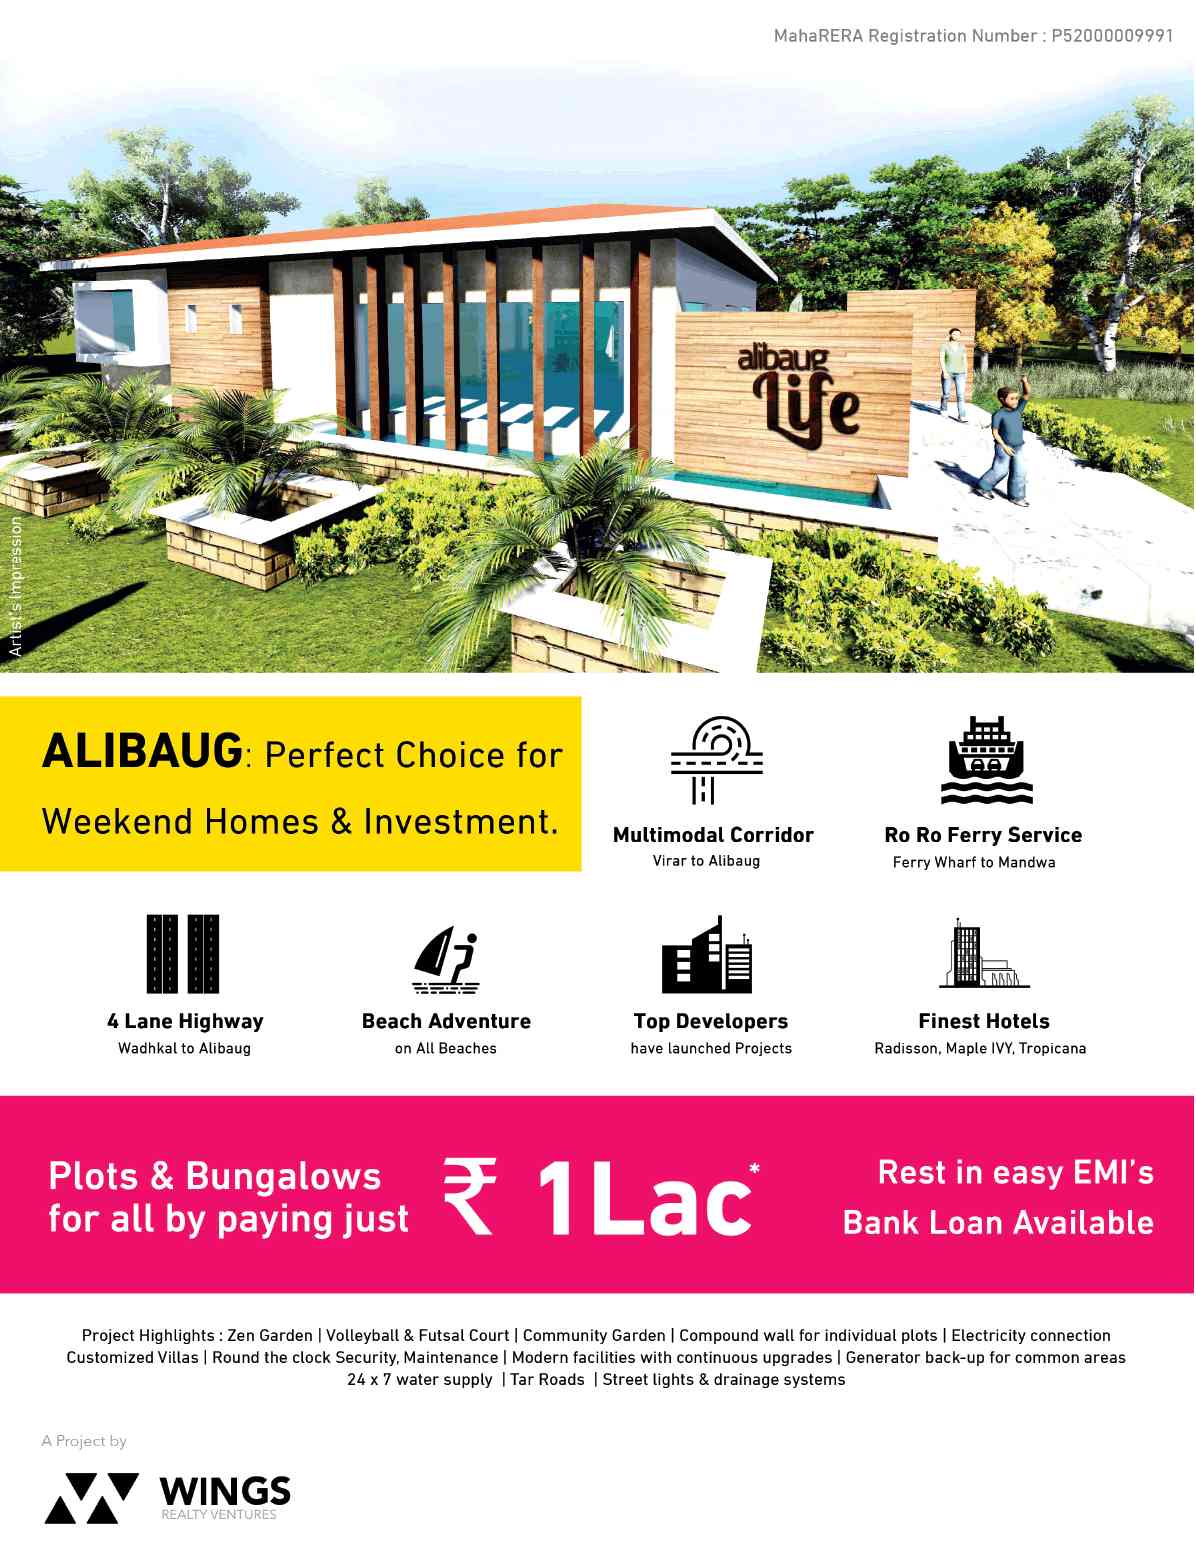 Wings Alibaug Life is the perfect choice for weekend homes & investment in Mumbai